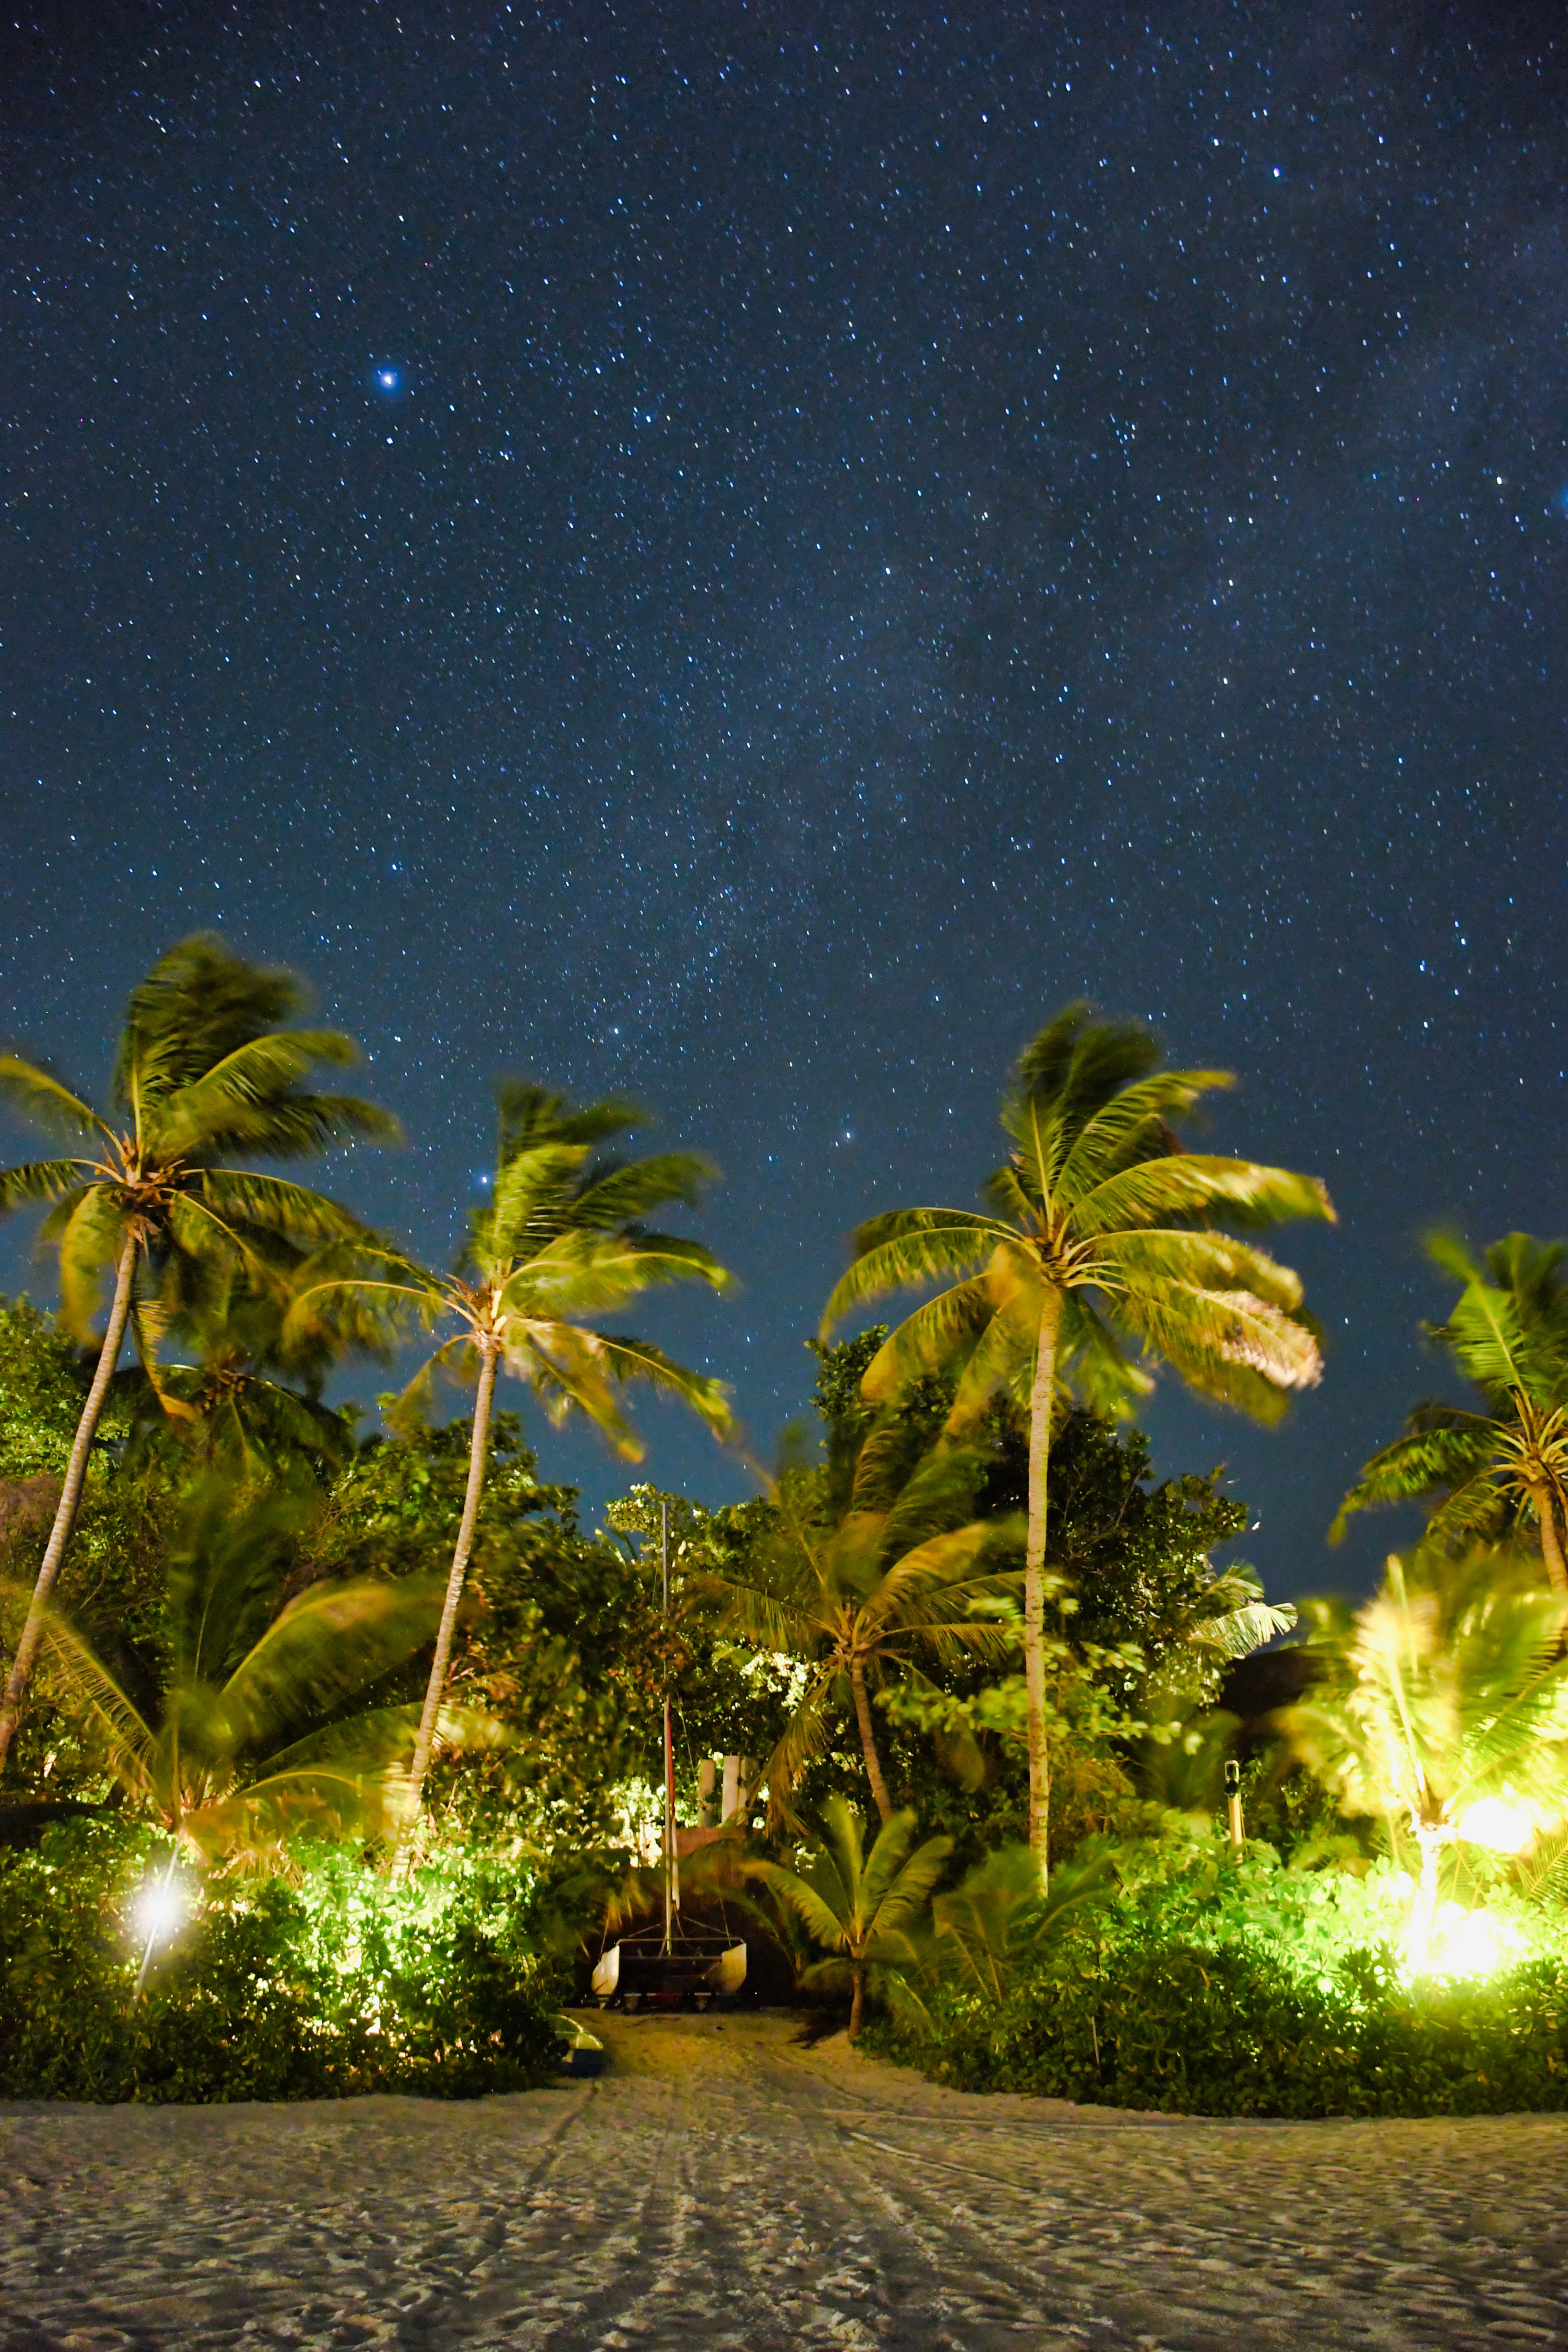 The starry night sky seen above palm trees fringing the beach on Milaidhoo island (Valerie Stimac)